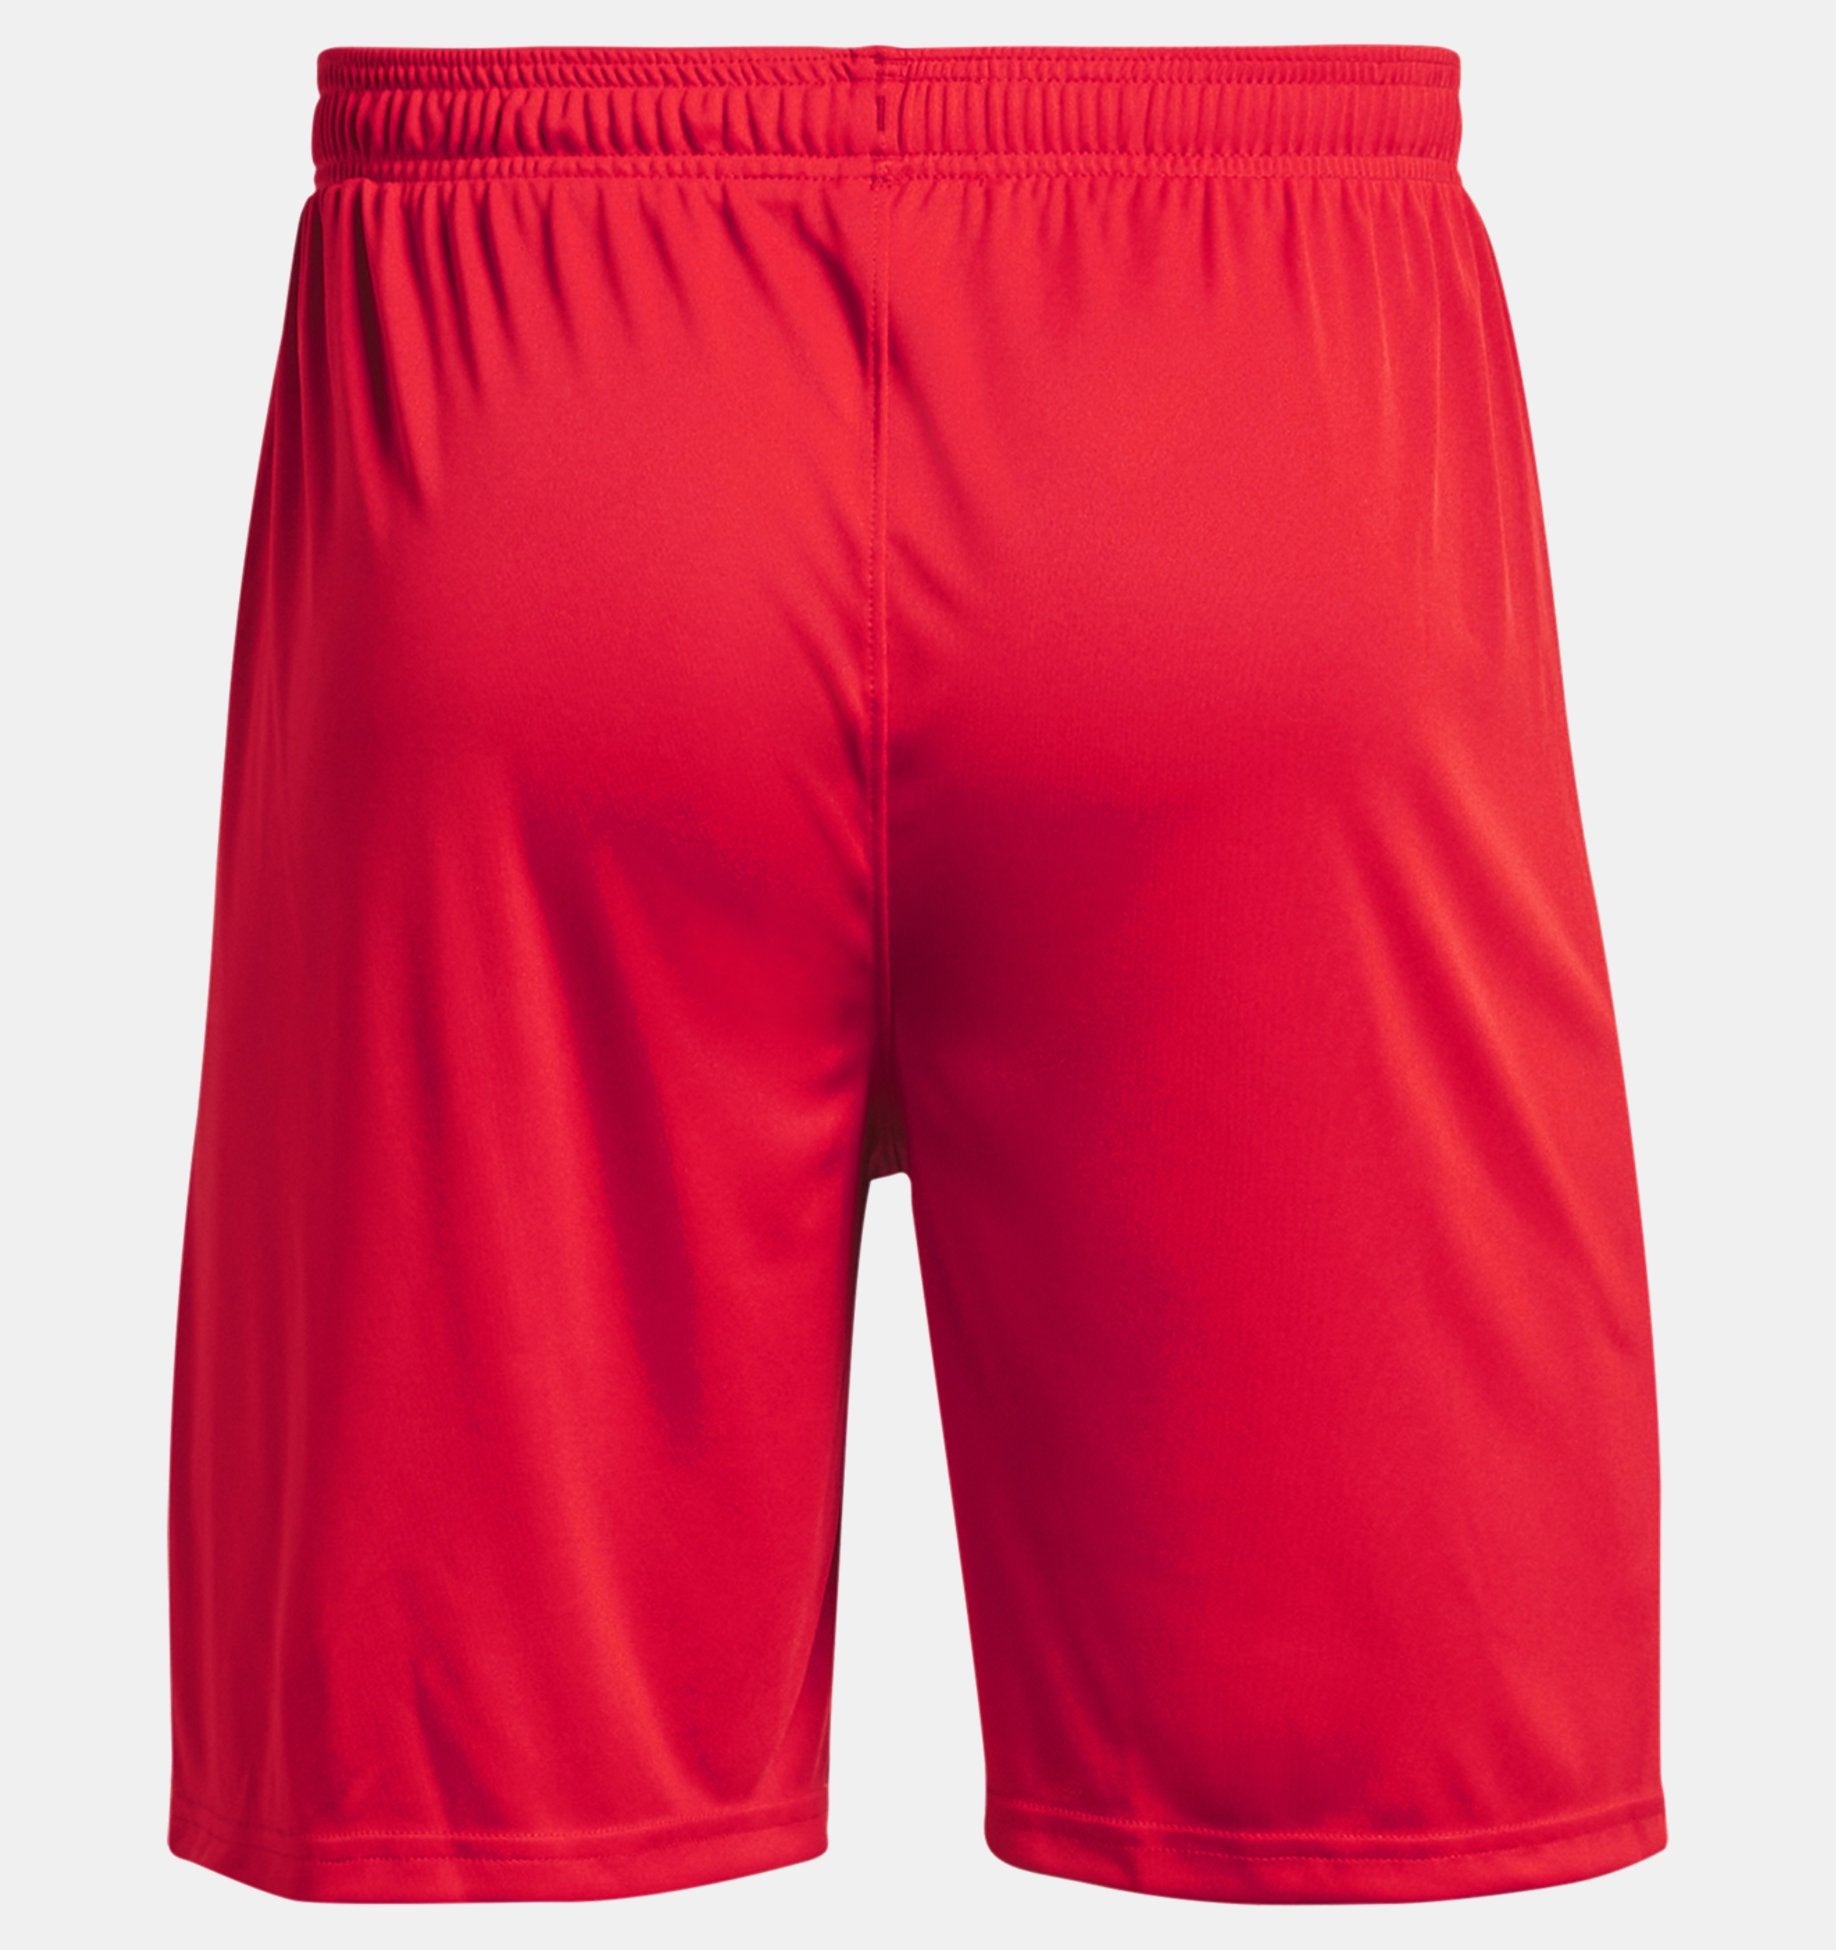 SHORT-SPORT-HOMME-GOLAZO-3.0-ROUGE-UNDER-ARMOUR-1369058-RED-MAHEU-GO-SPORT-07